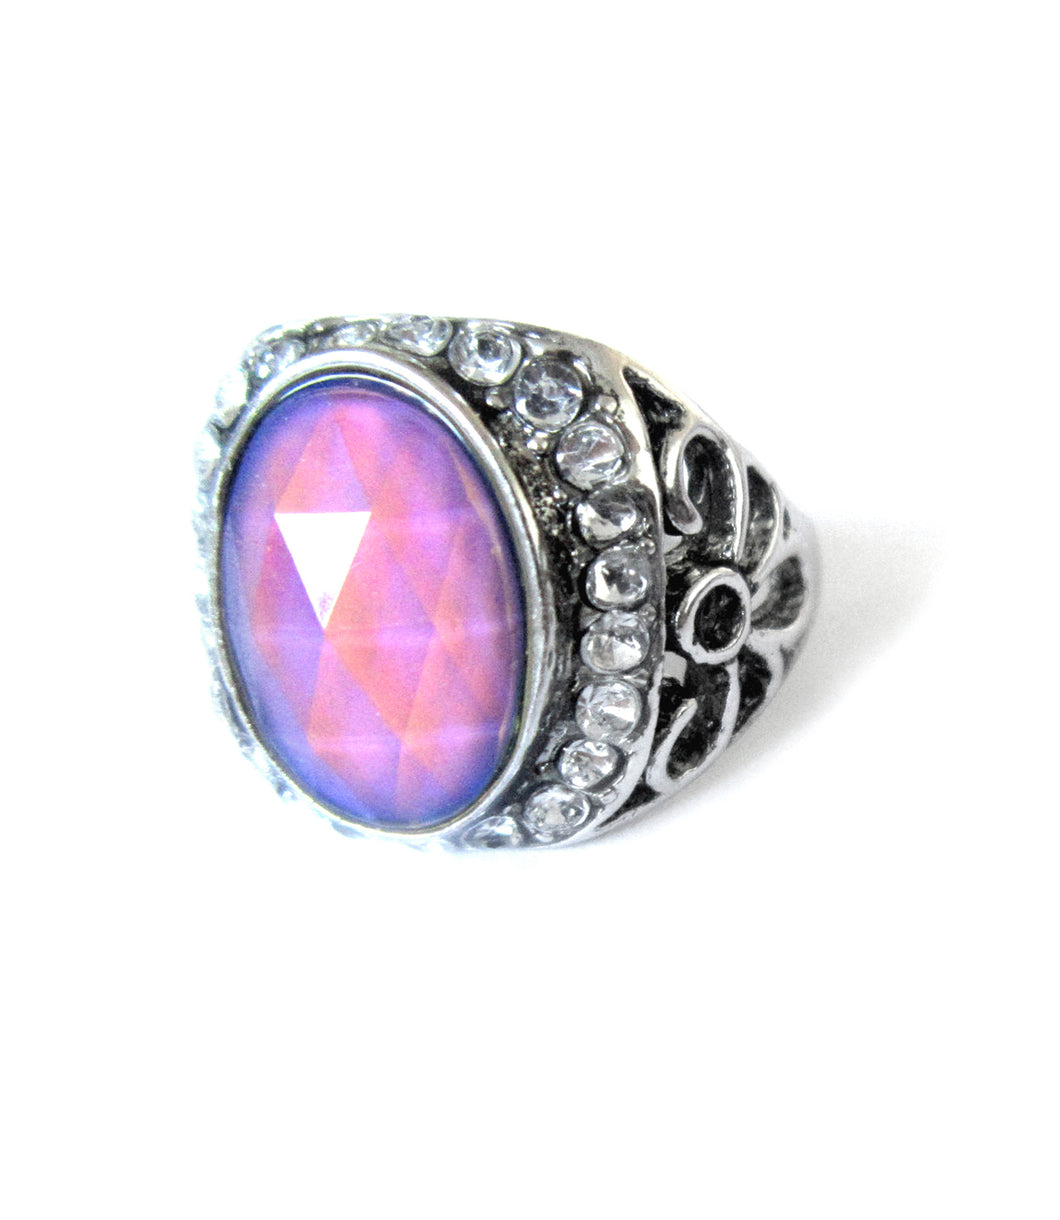 a mood ring by best mood rings showing a pink mood